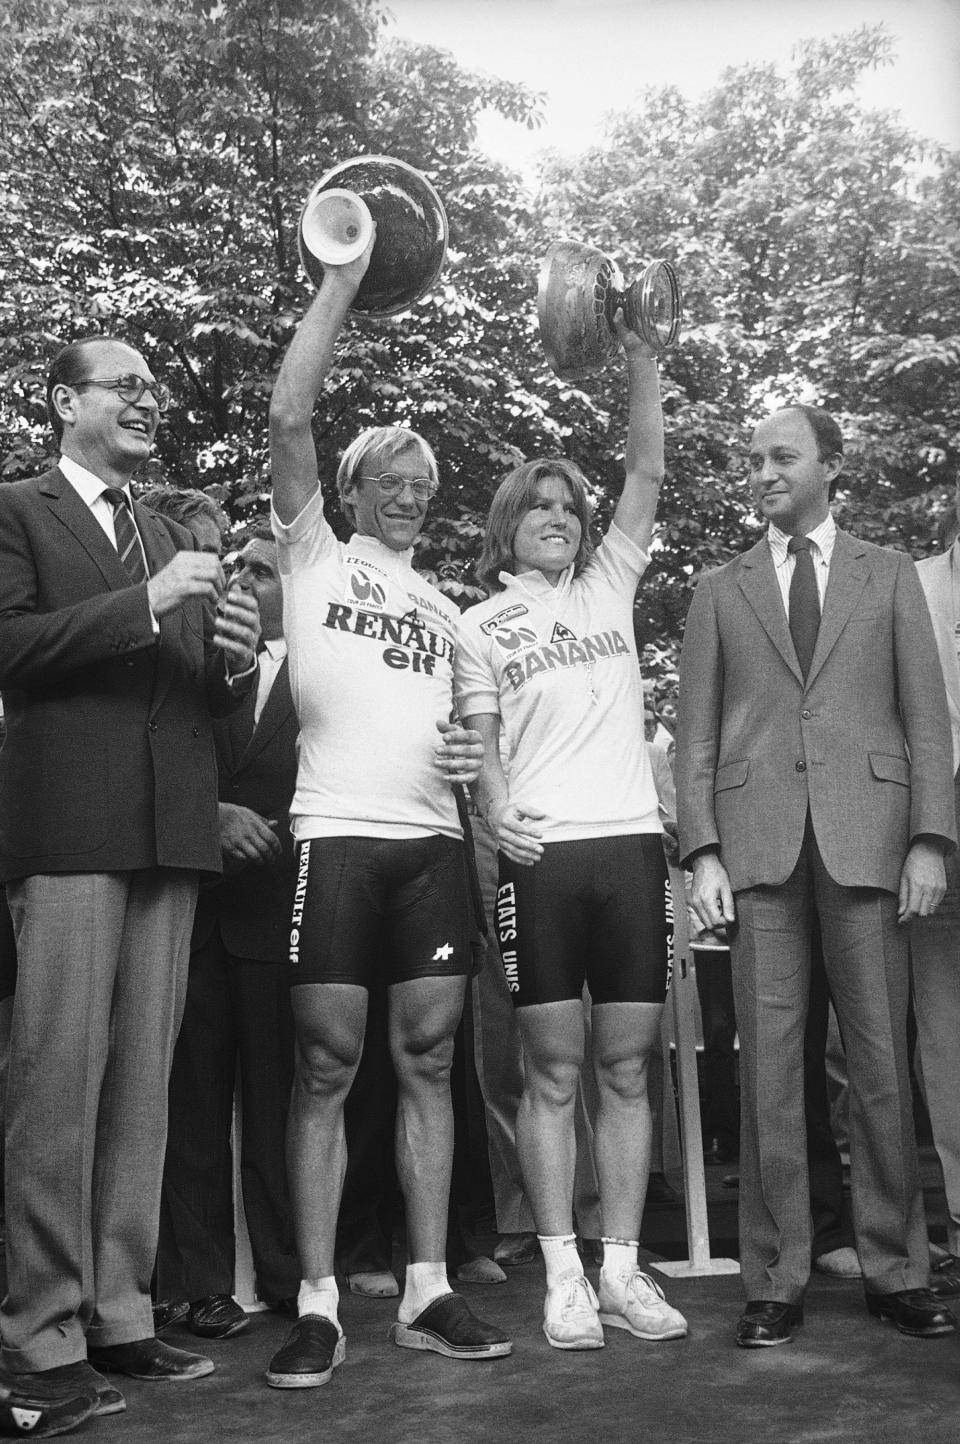 FILE - In this Sunday, July 23, 1984 file photo, Laurent F. Fignon, left, of France, and Marianne Martin of Boulder, Colorado, hold up their trophies in Paris after winning the men's and women's Tour de France cycling races. A women's version of the Tour de France will be held in 2022 with a start on Paris' iconic Champs-Elysees boulevard after the conclusion of the men's race, organizers announced Thursday June 17, 2021. (AP Photo/Steven, File)